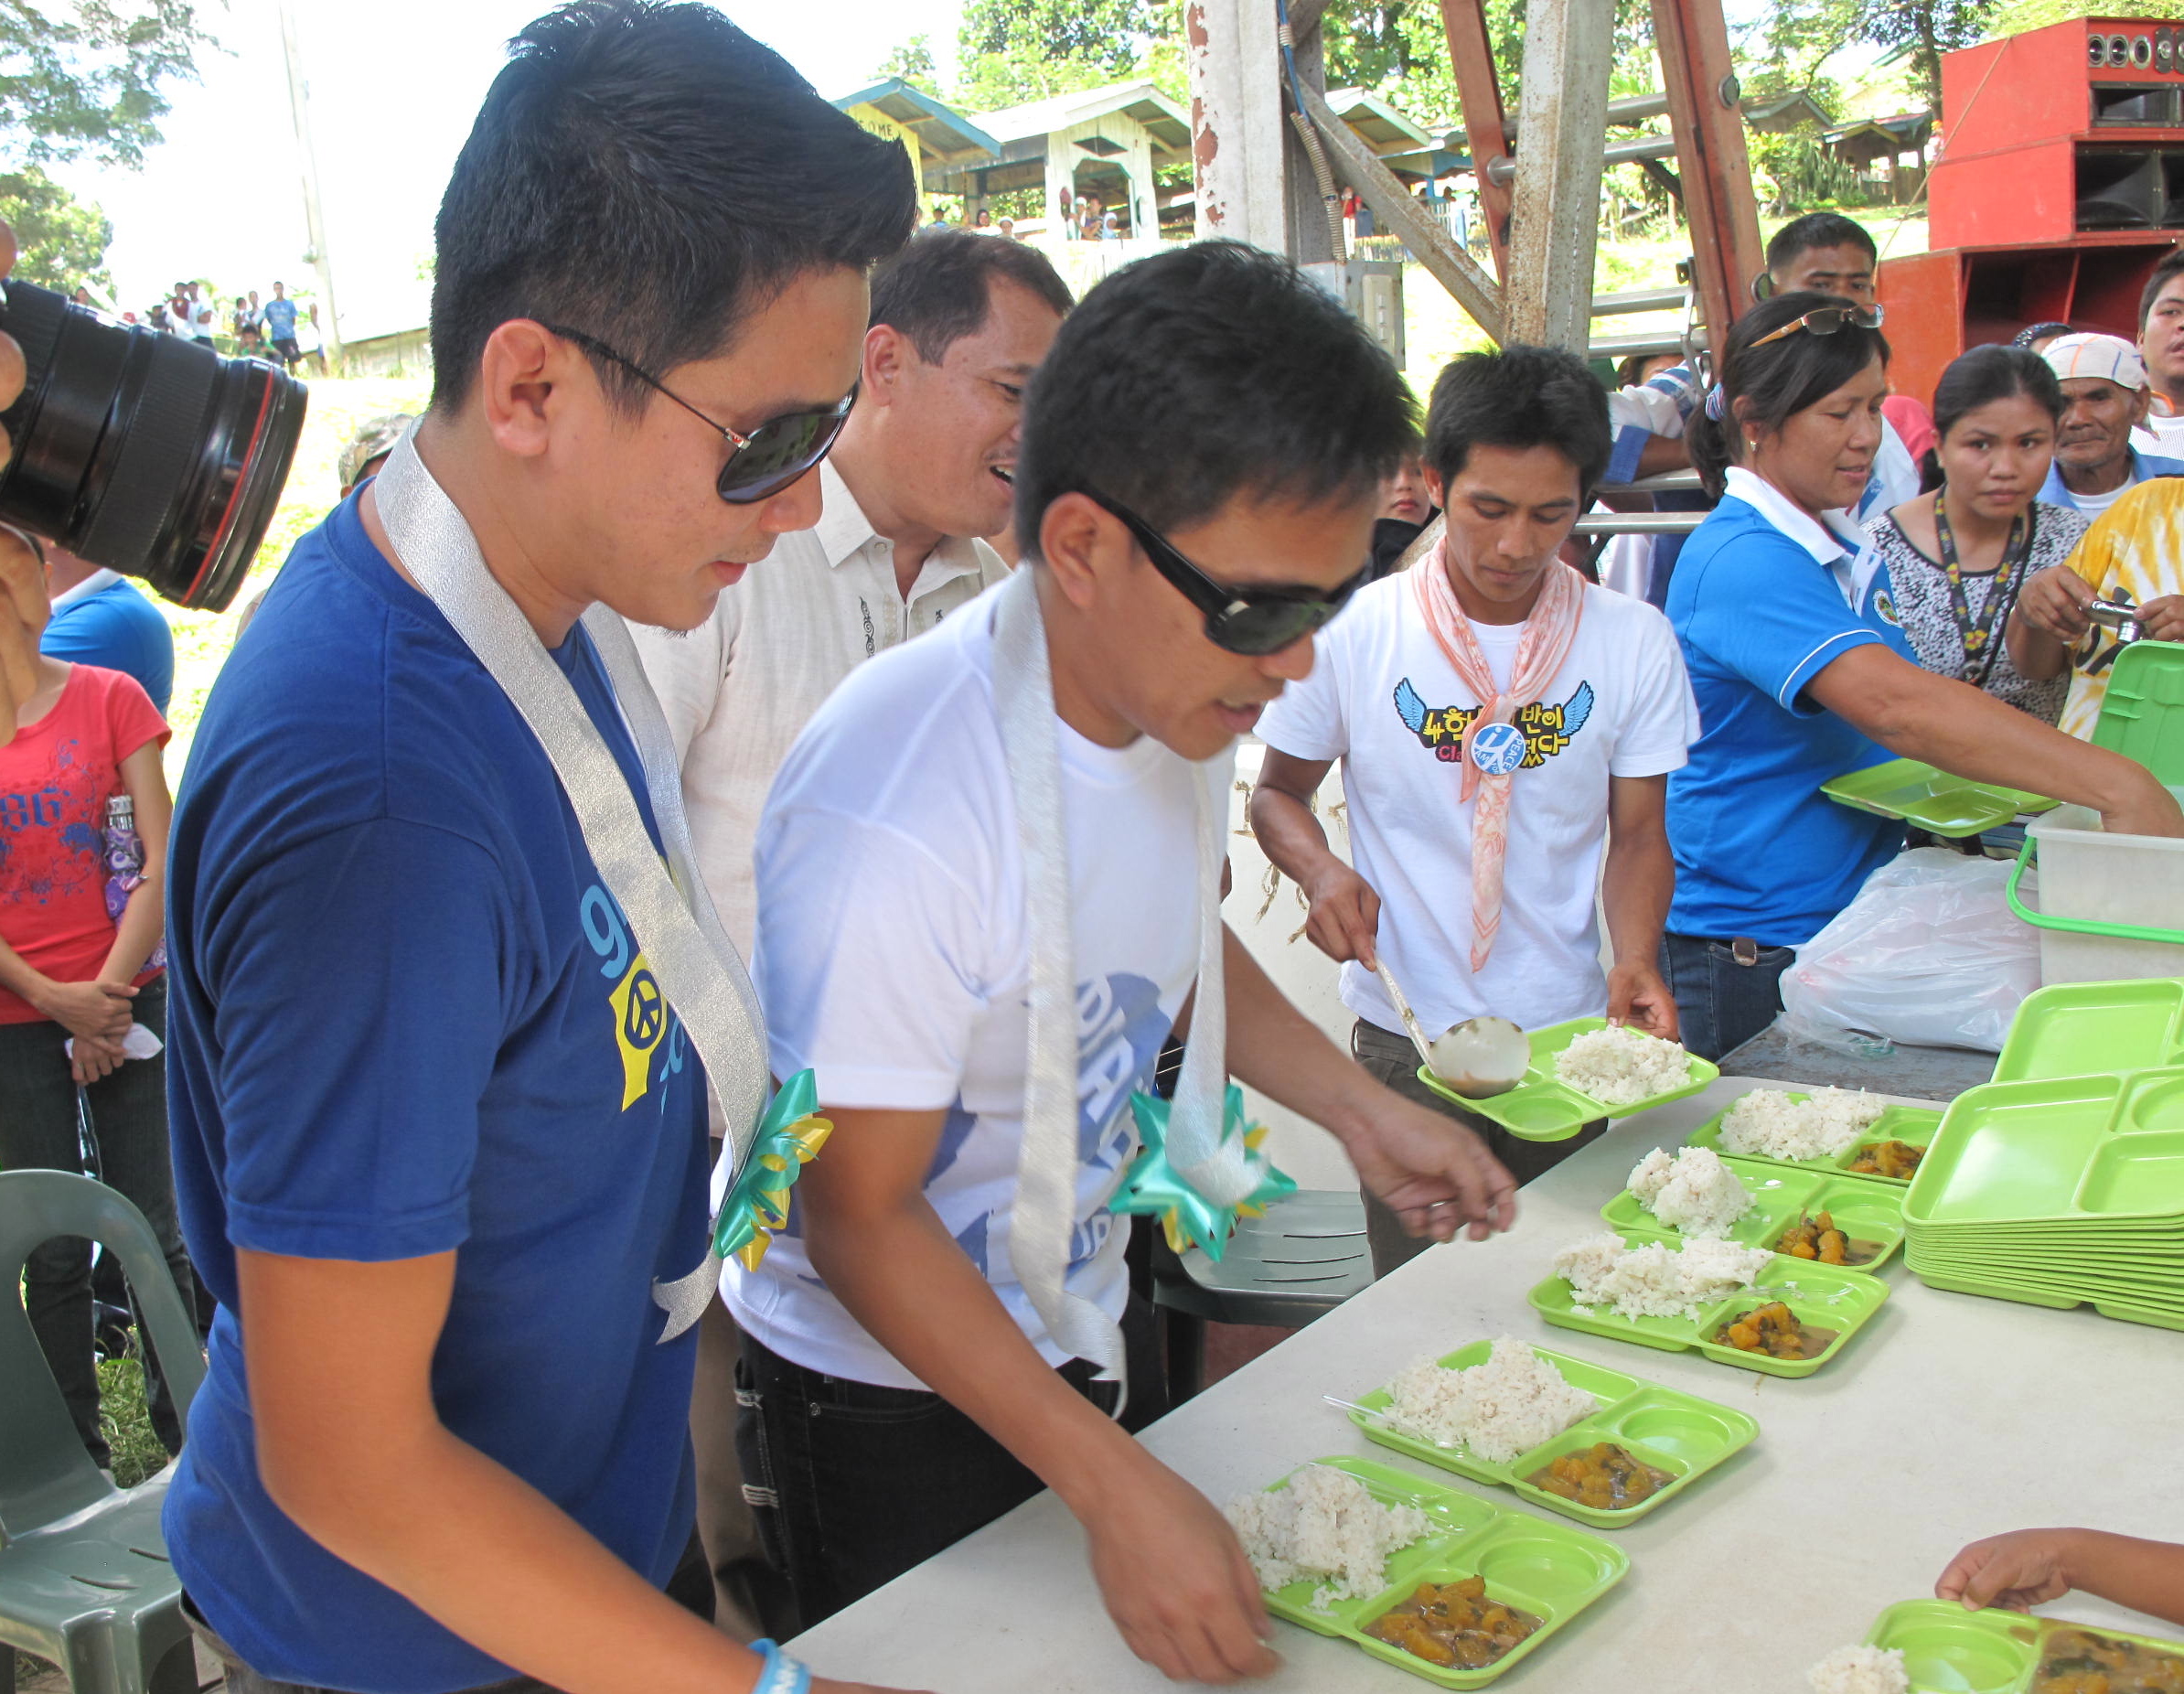 HELPING HANDS. Musicians Ebe Dancel and Datu Khomeni take part in a feeding program in Aleosan, North Cotabato. Photo by Angela Casauay.